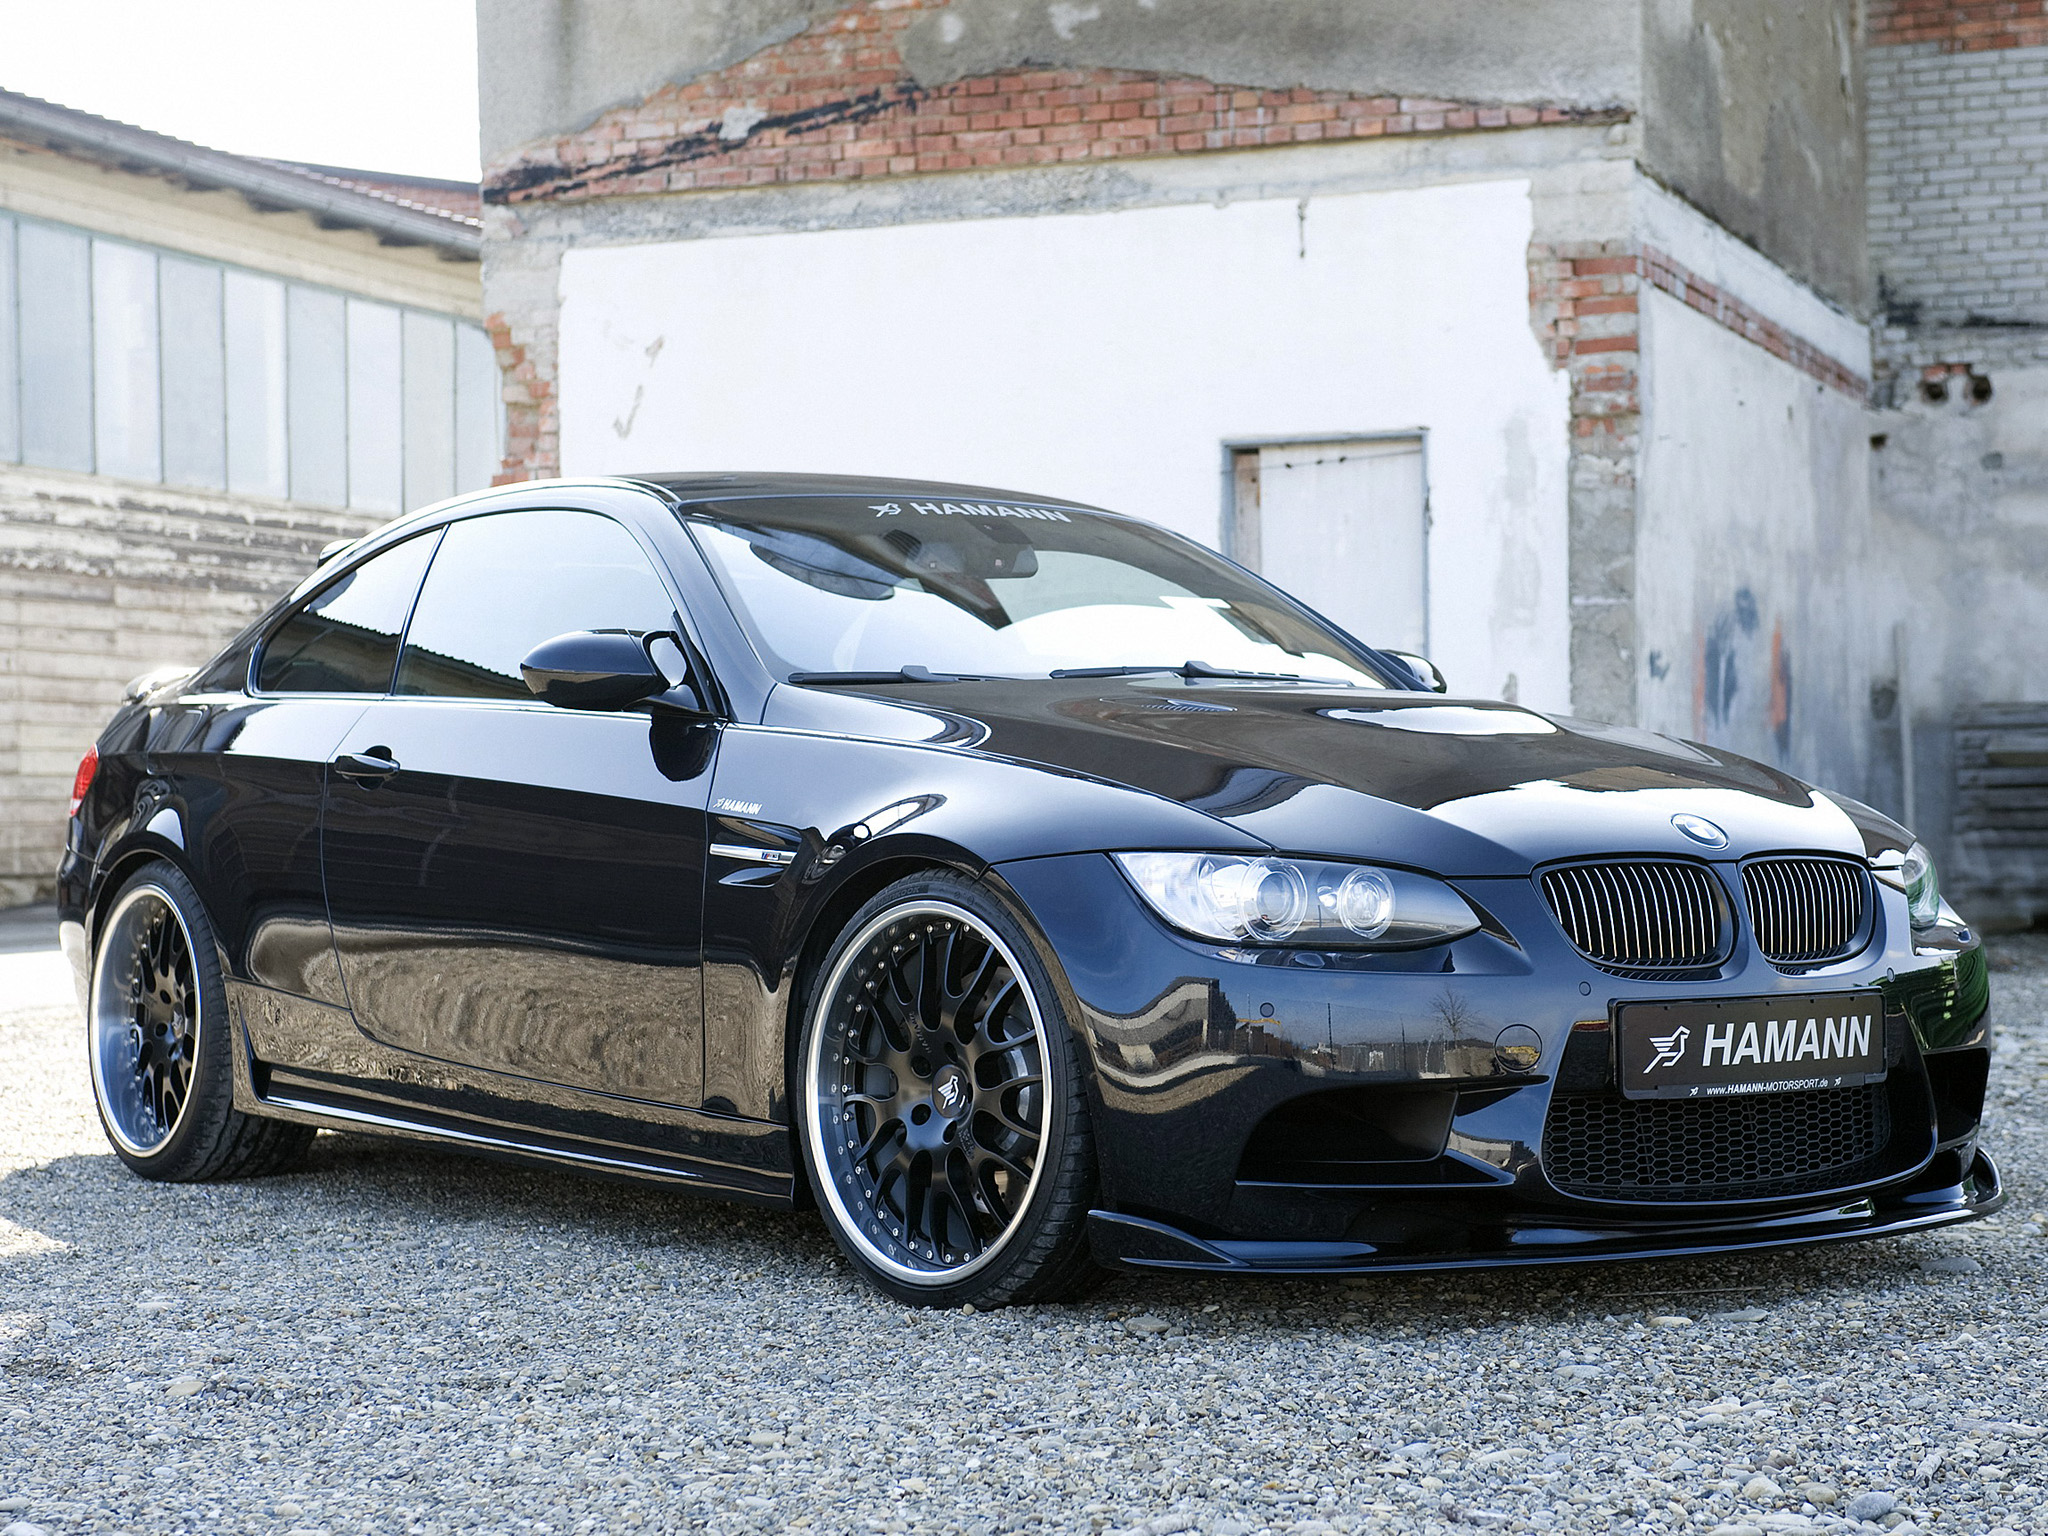 BMW Hamann wallpapers, Vehicles, HQ BMW Hamann pictures